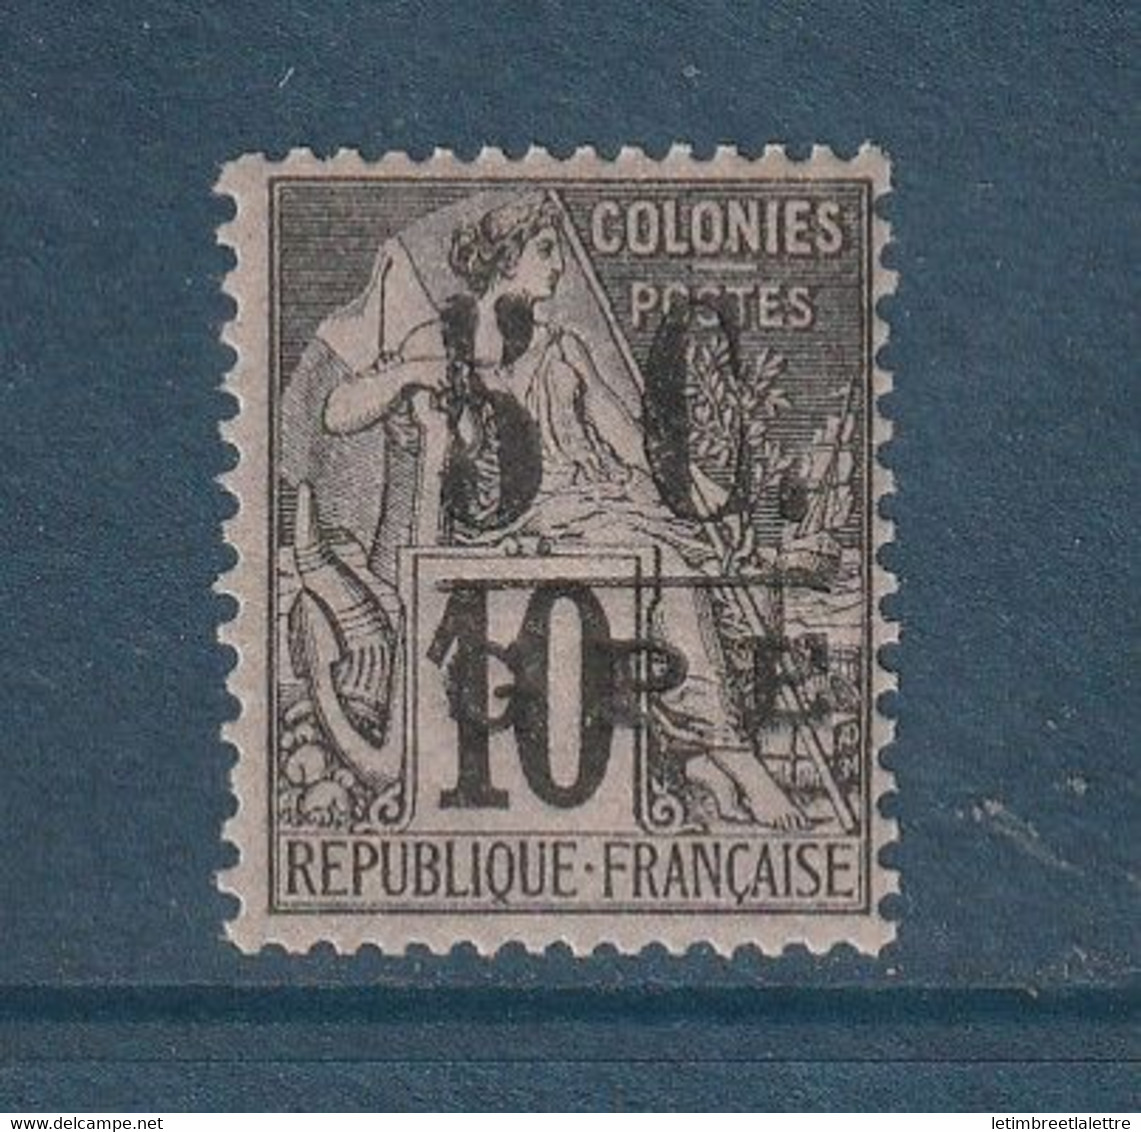 ⭐ Guadeloupe - YT N° 10 * - Neuf Avec Charnière - 1890 / 1891 ⭐ - Unused Stamps